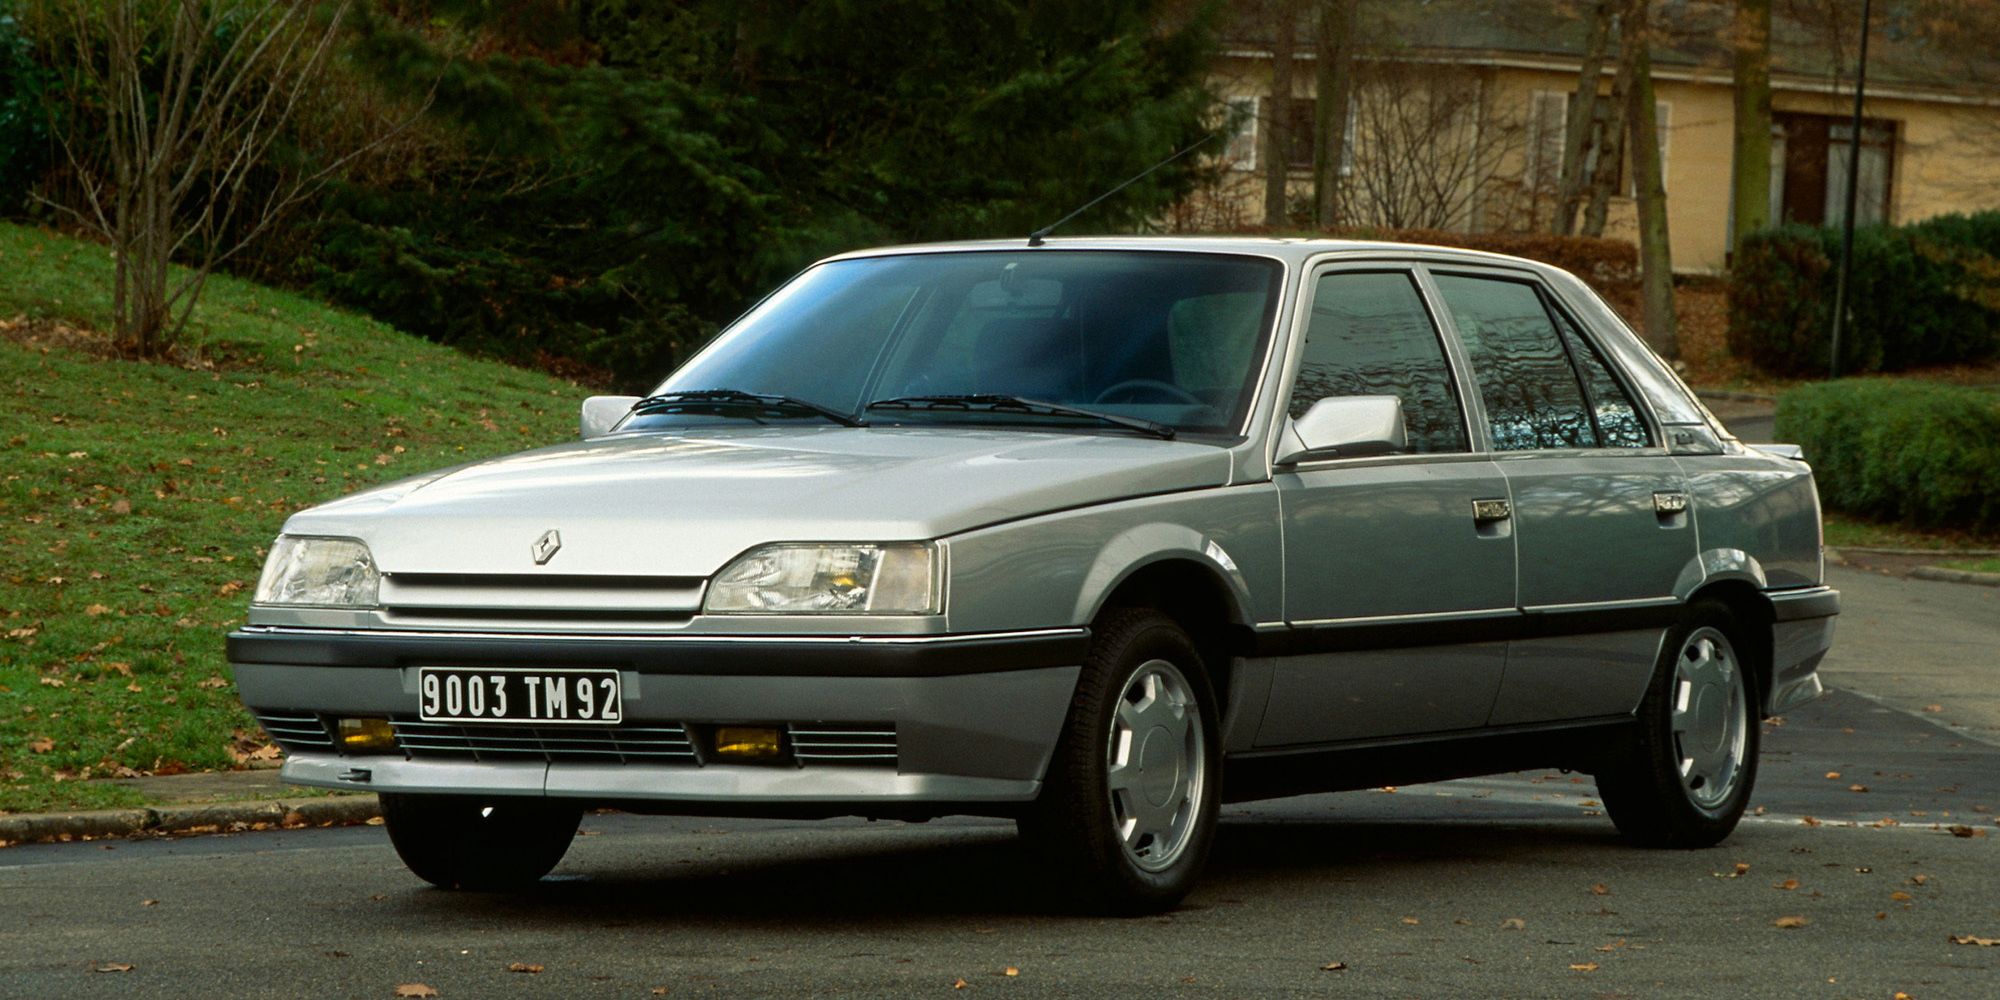 A late model Renault 25 in silver